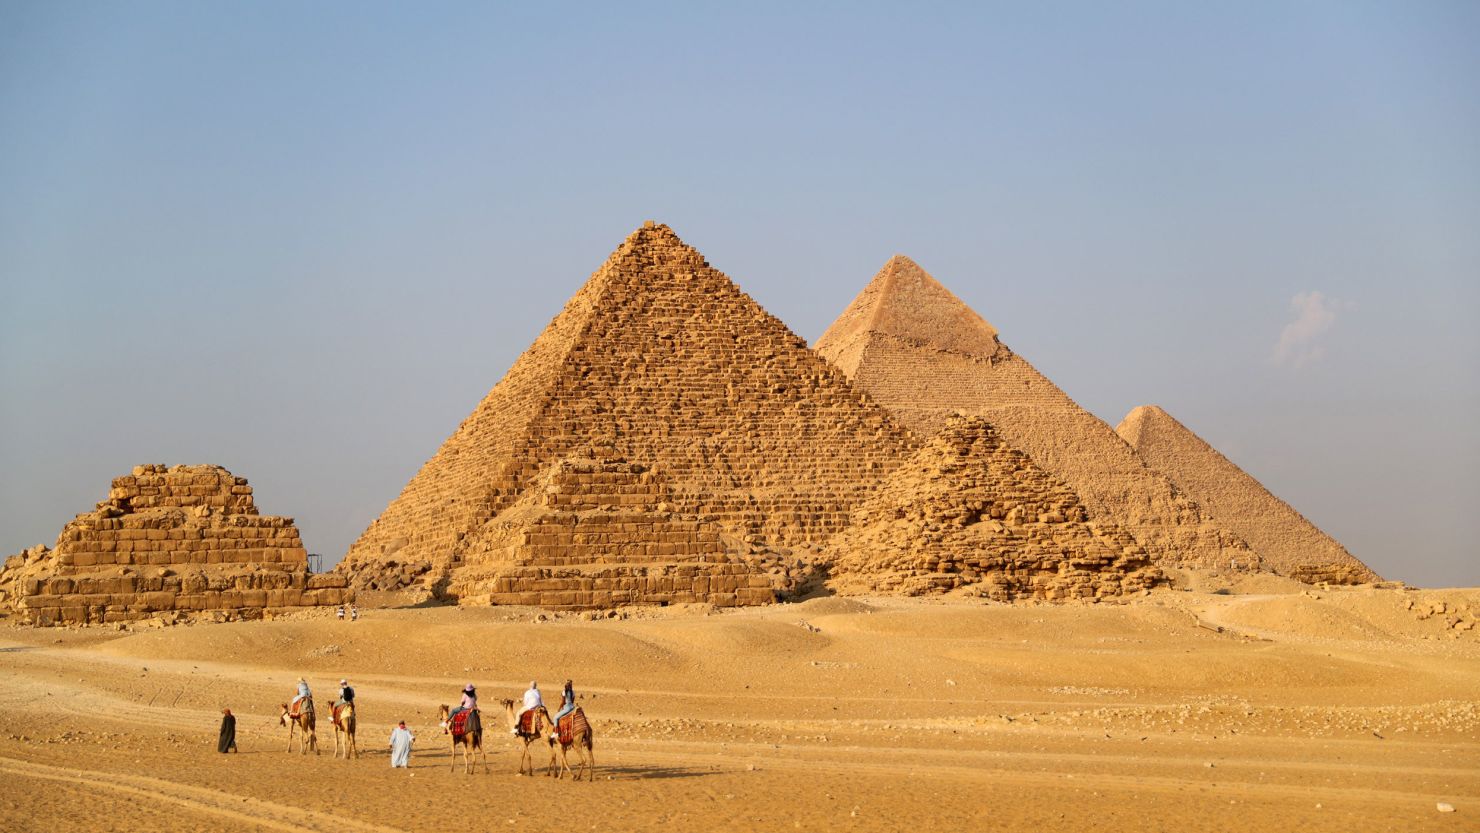 A now-dry branch of the Nile helped build Egypt's pyramids, new study says